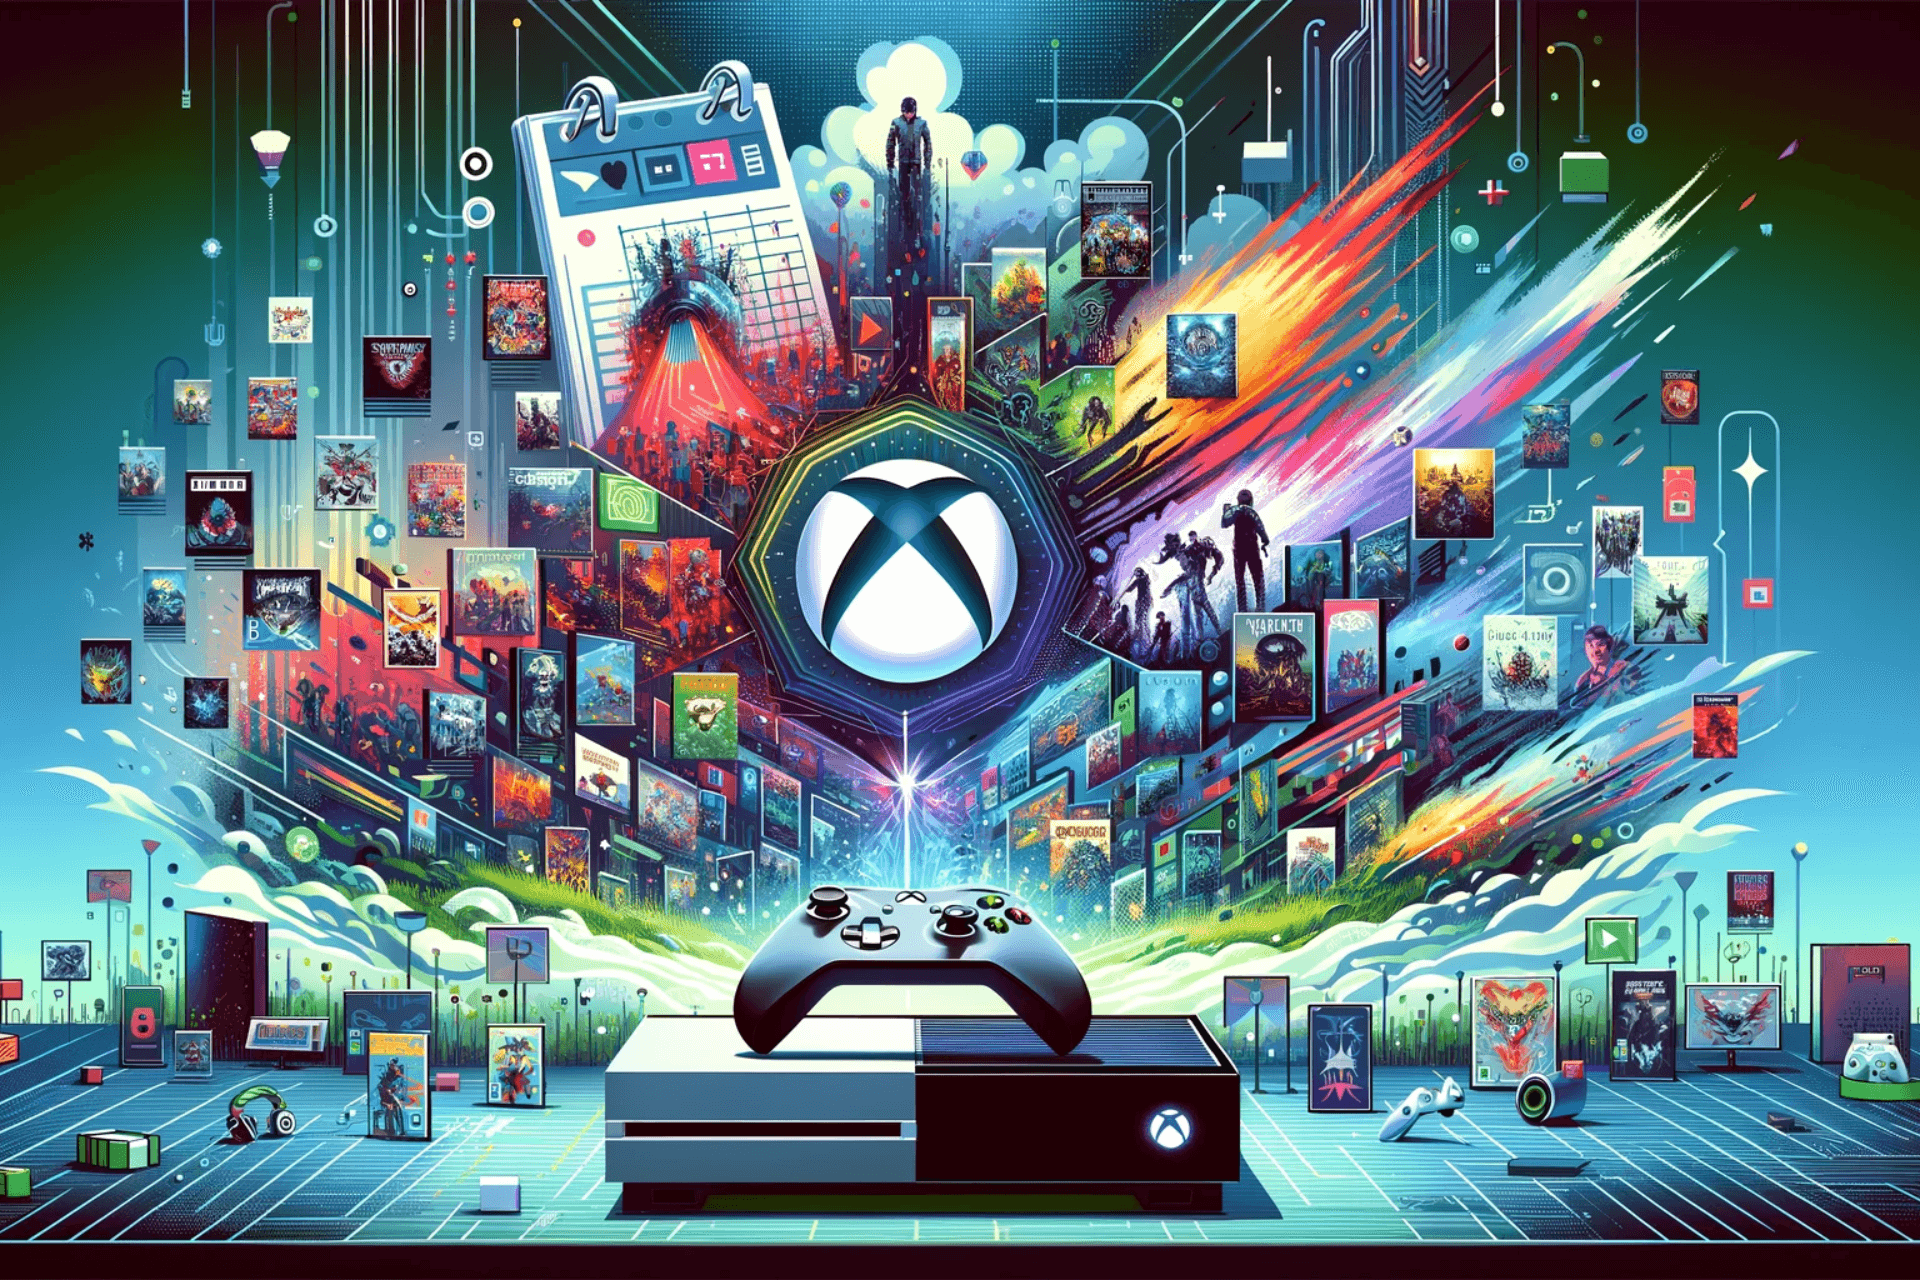 Choosing the Best Indie games on Xbox Now Becomes Easier With Permanent Store Collections & Monthly Picks